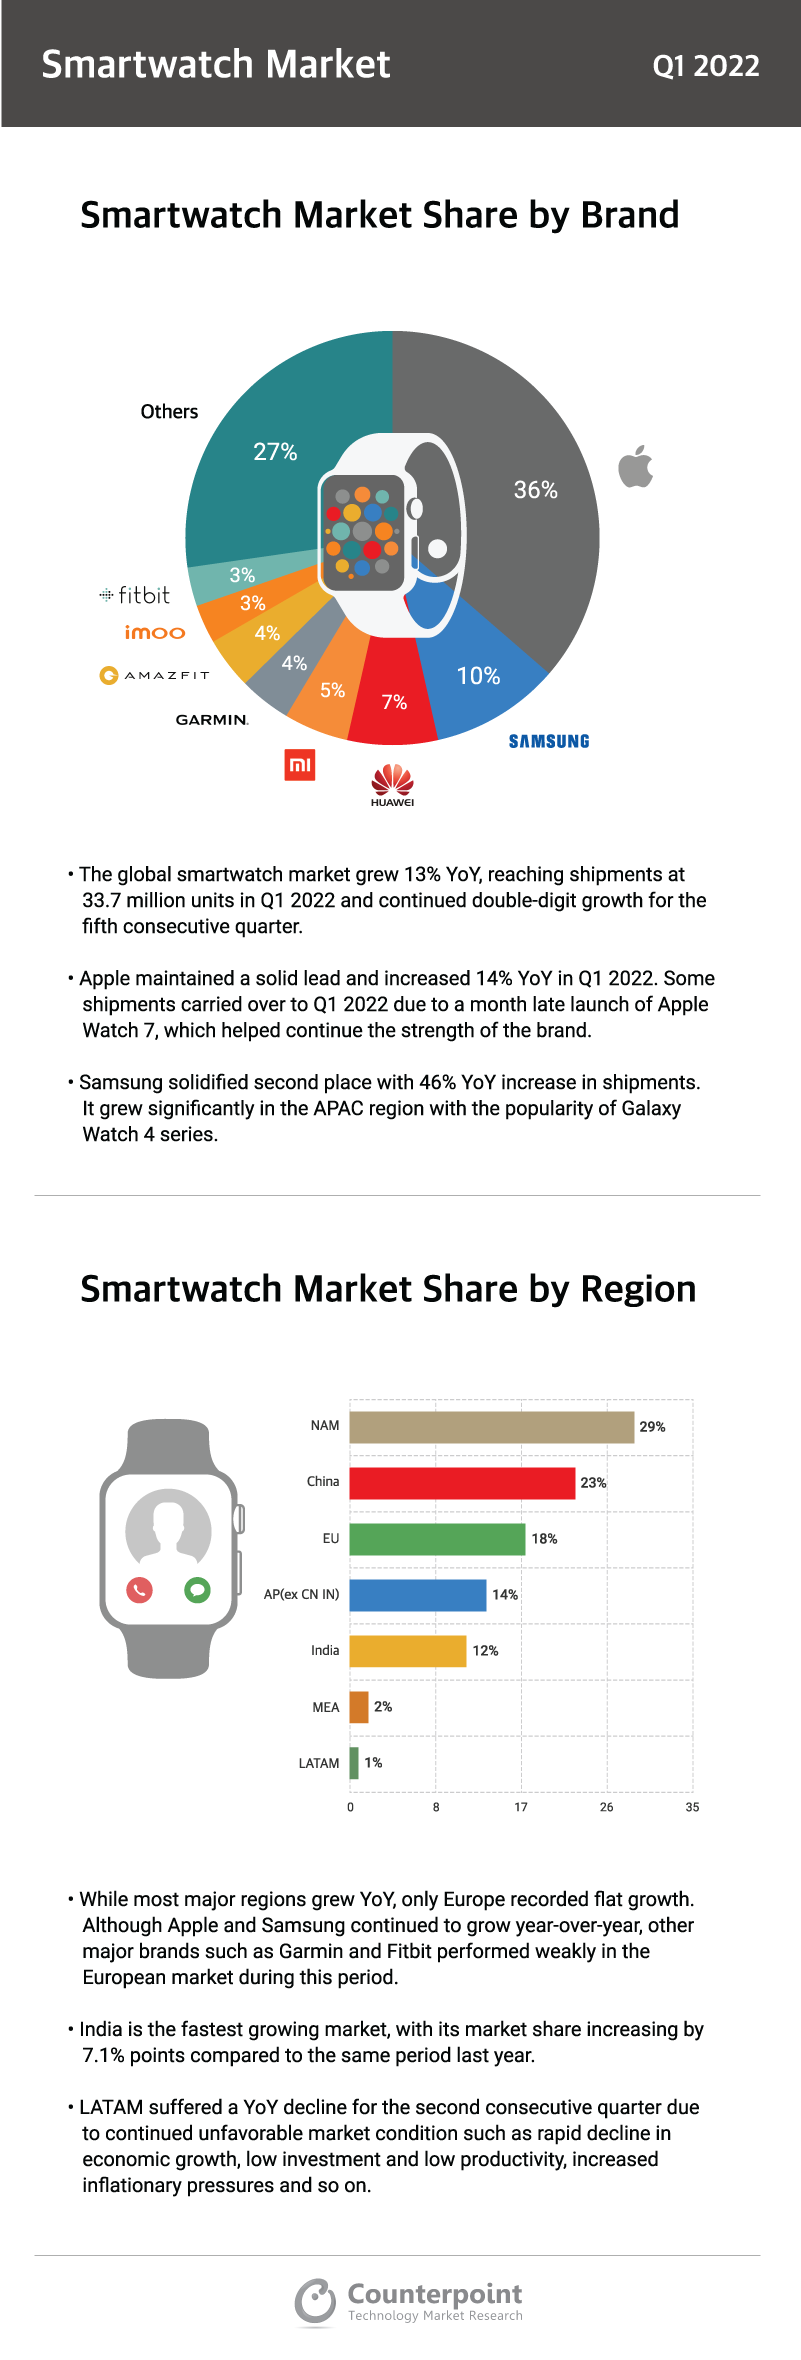 Counterpoint Research Infographic: Smartwatch Market | Q1 2022